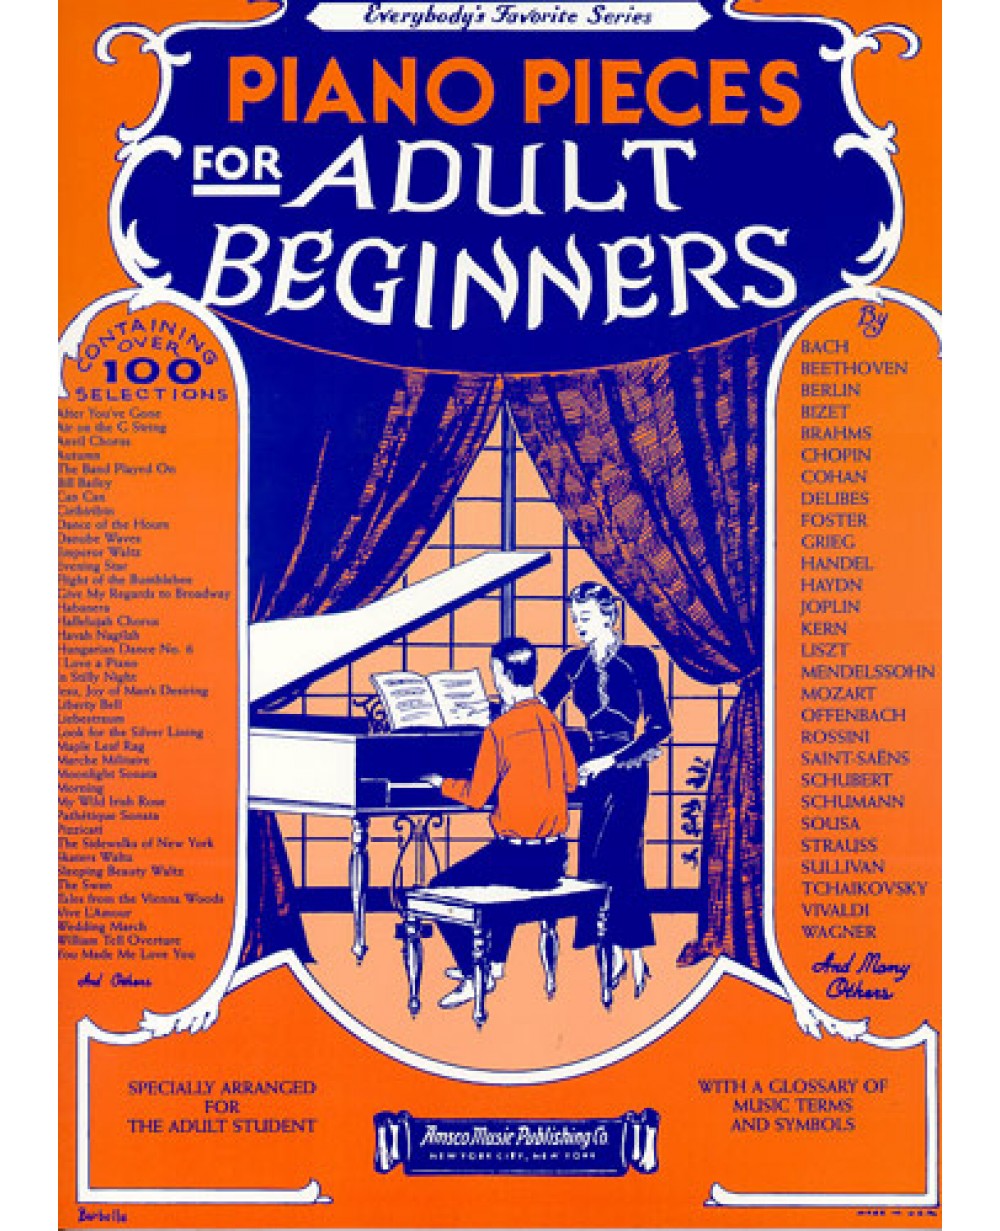 Piano-Pieces-for-Adult-Beginners